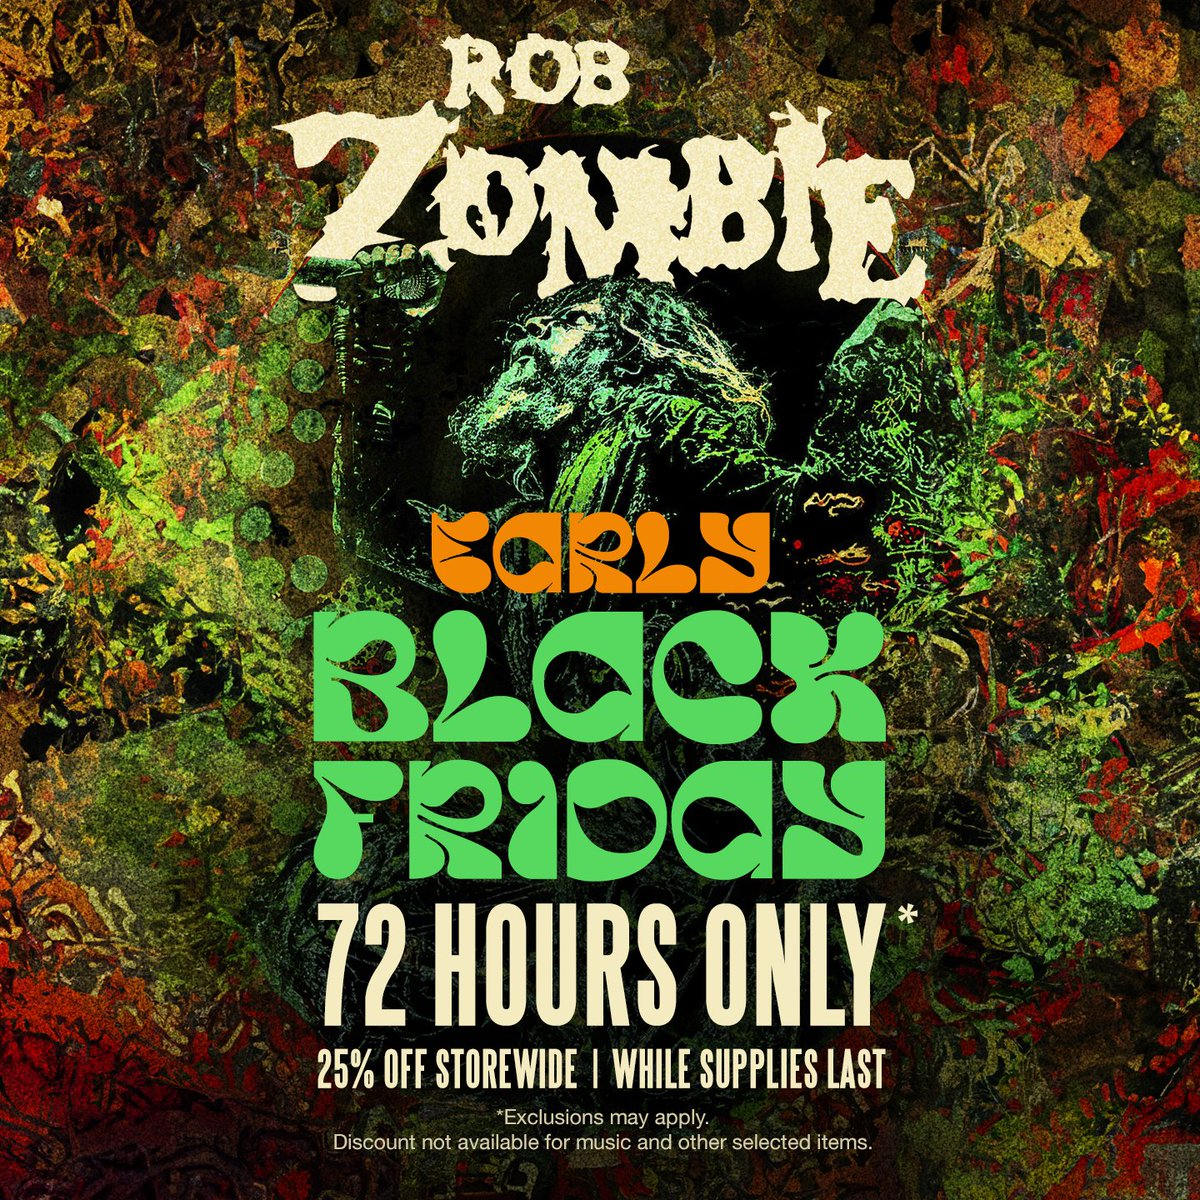 Early Black Friday sale starts now. 25% off storewide for 72 hours only shop.robzombie.com/collections/si…